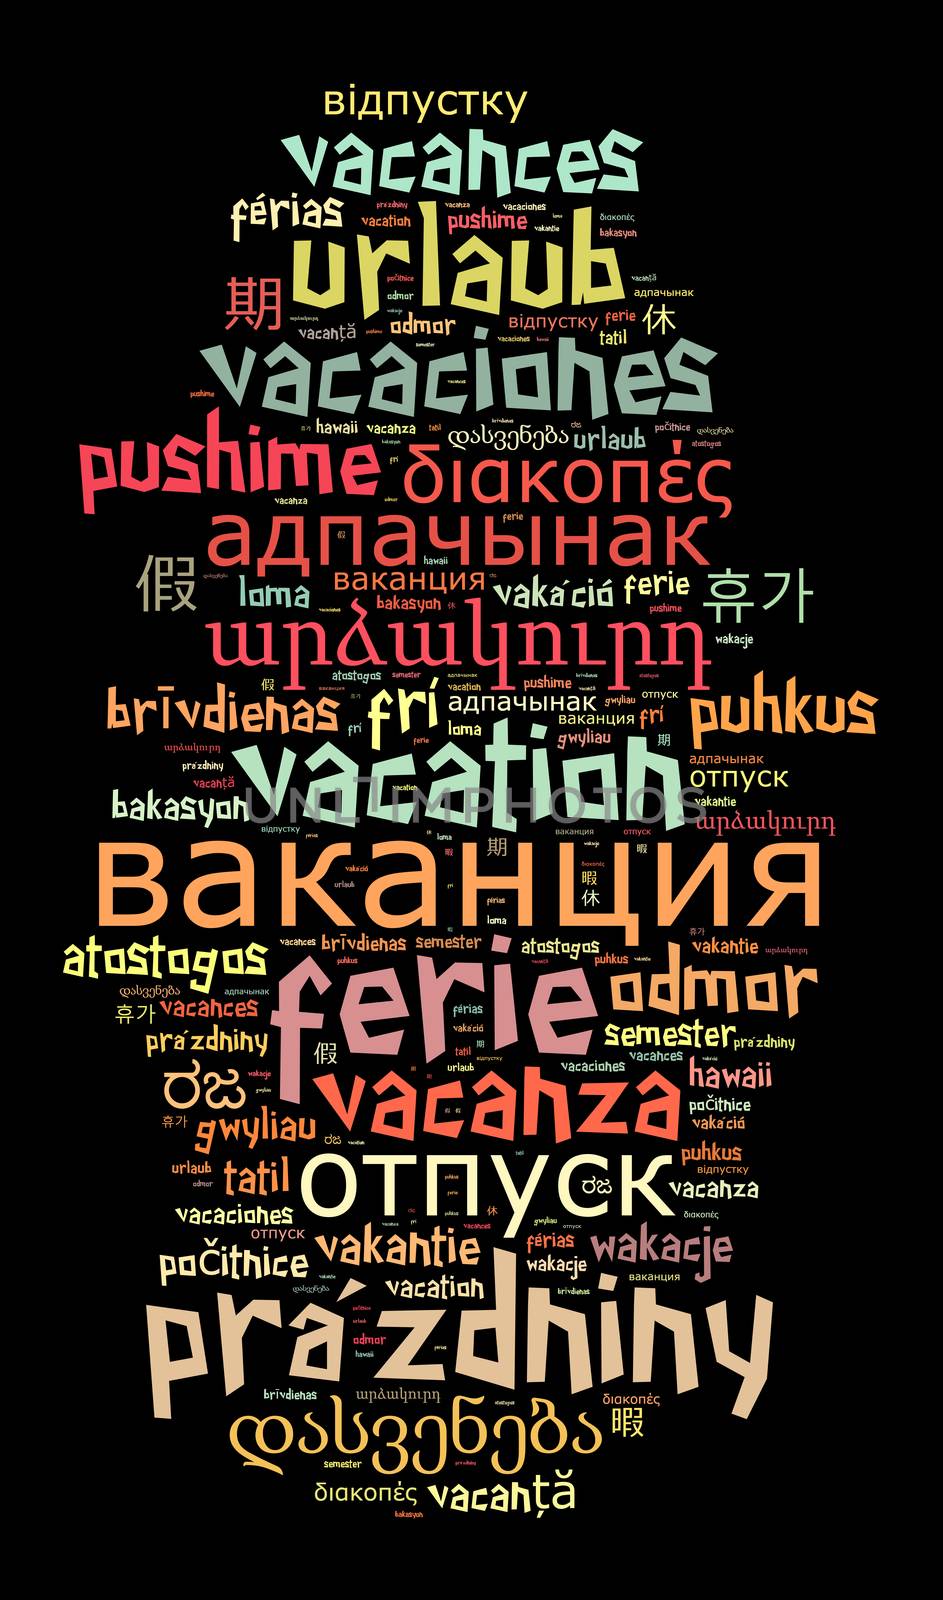 Word Vacation in different languages by eenevski